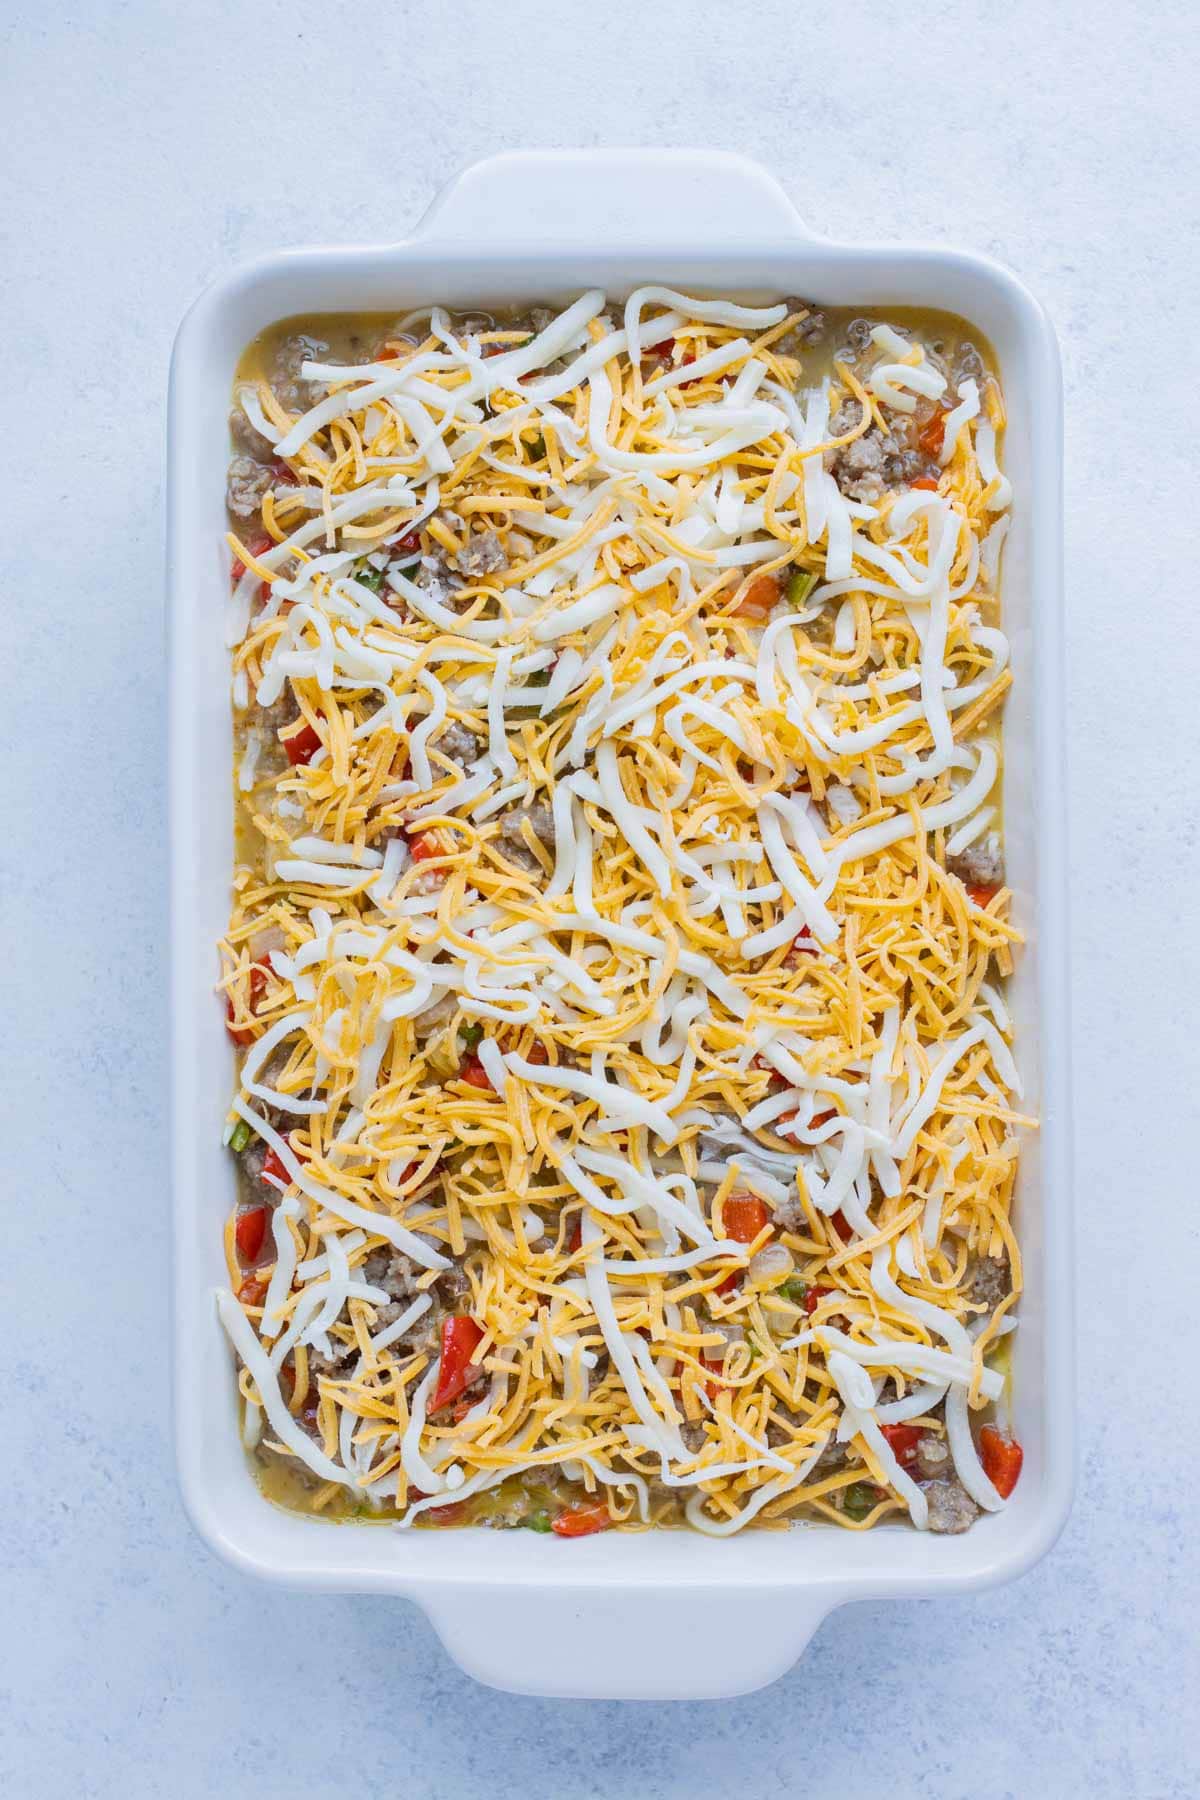 Cheese is spread over the top of the casserole.